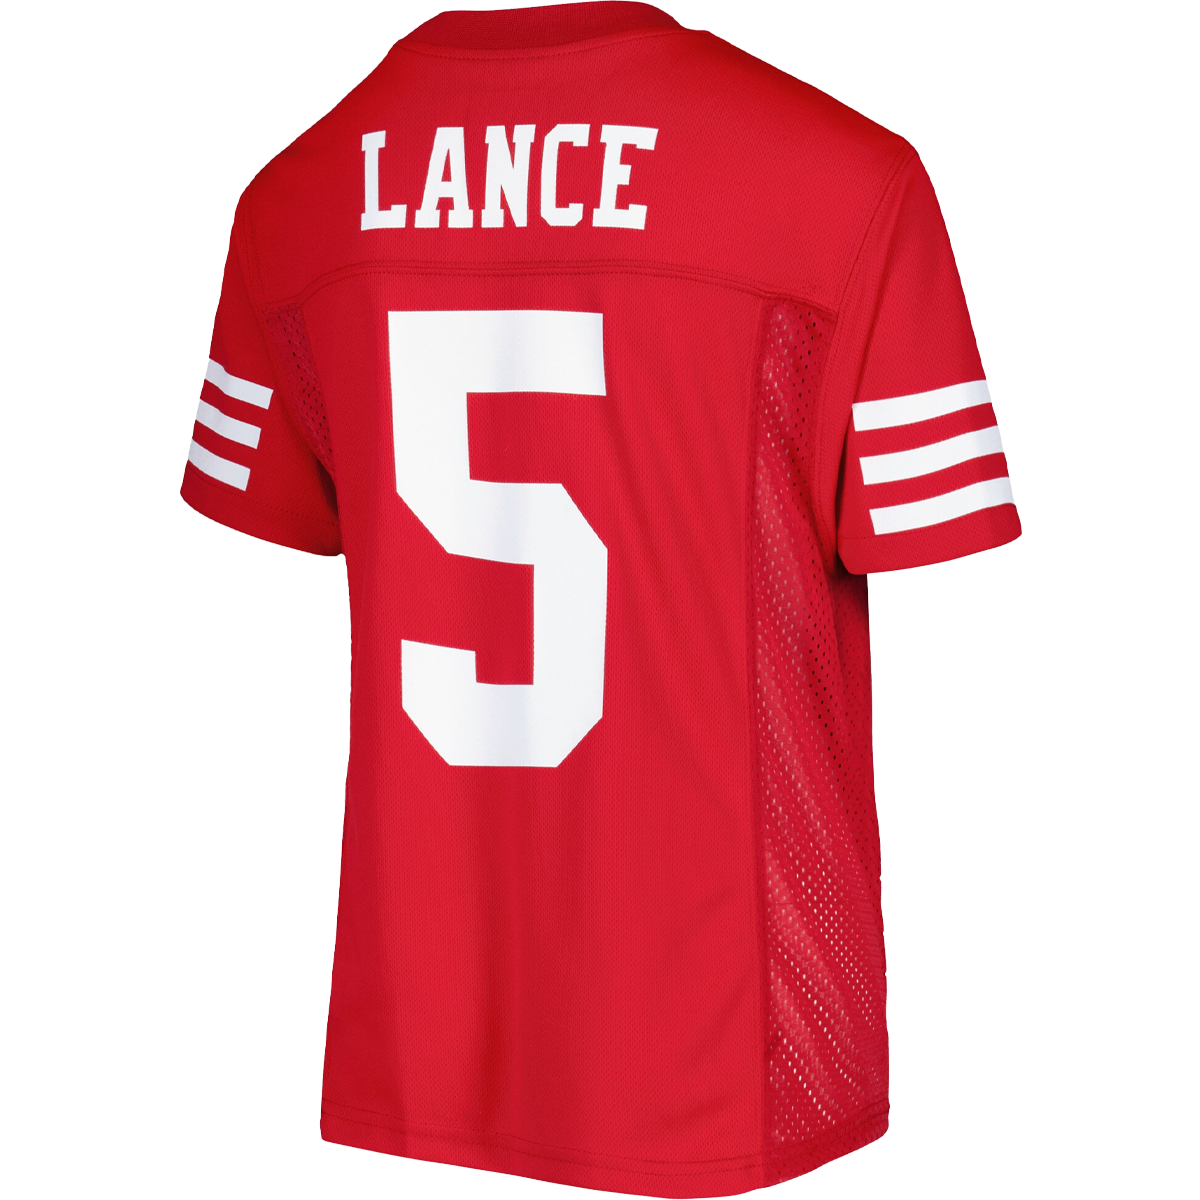 Youth 49ers Trey Lance Jersey alternate view